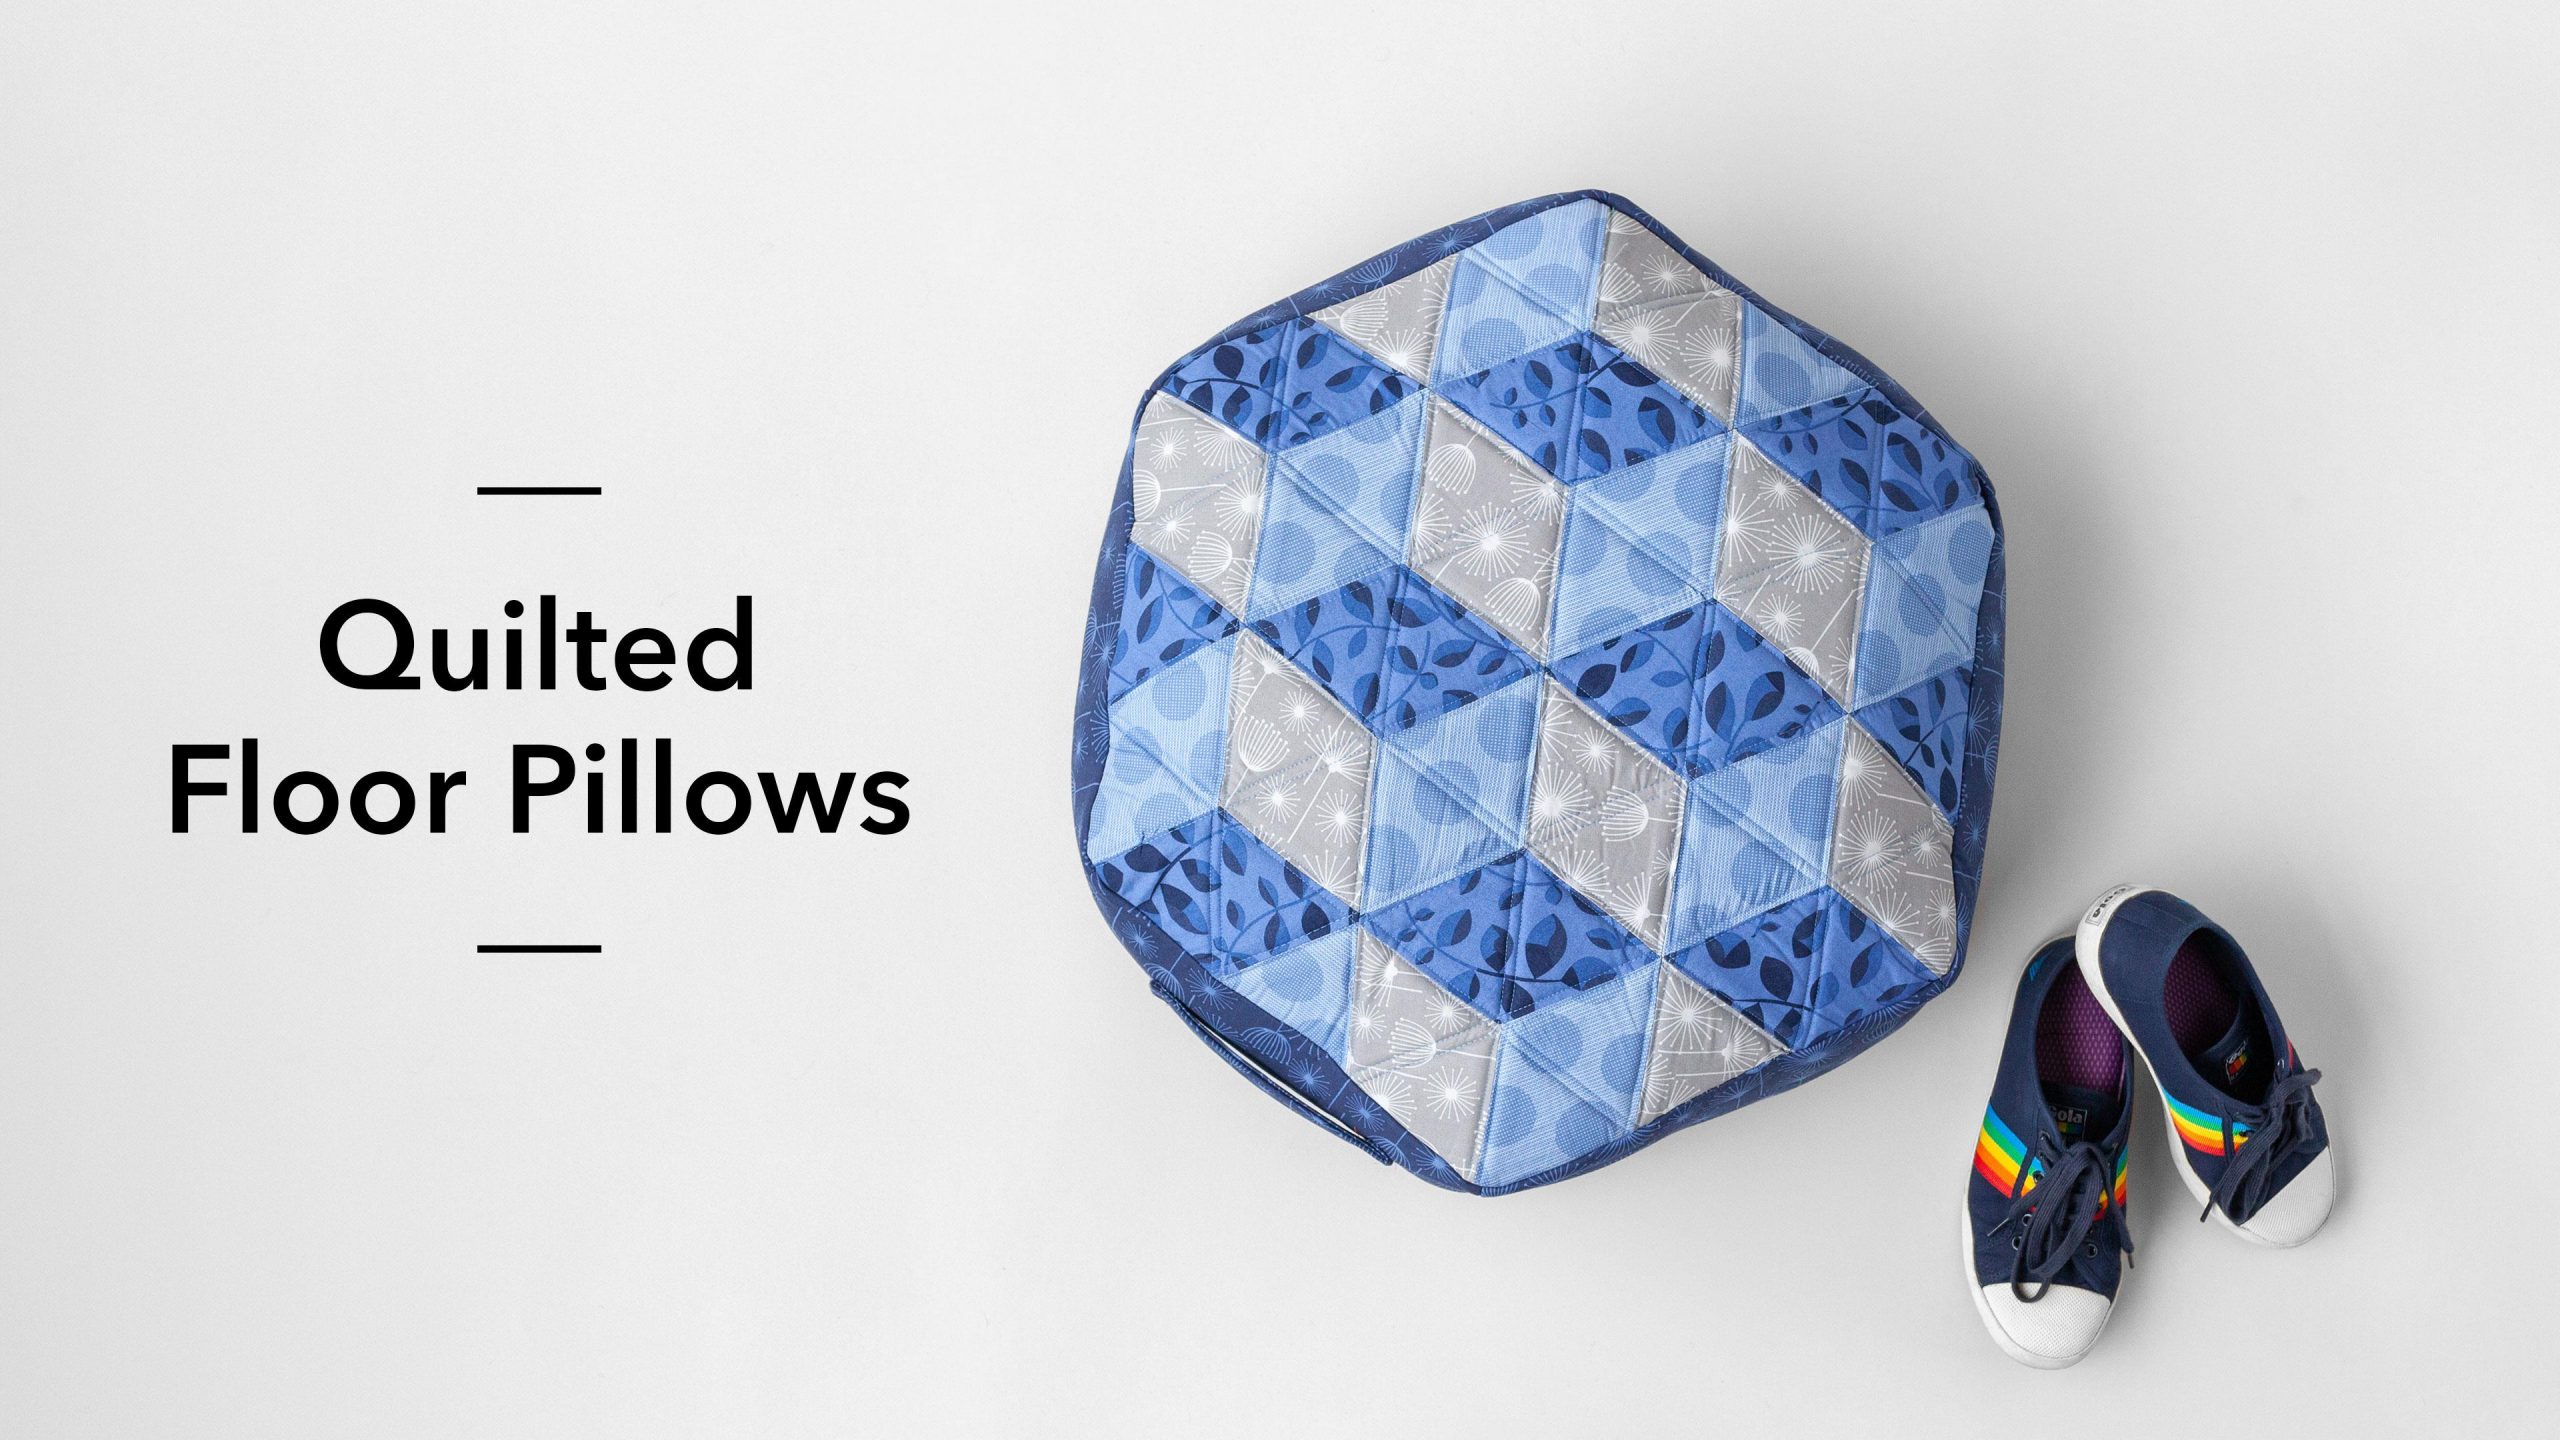 Quilted Floor Pillows